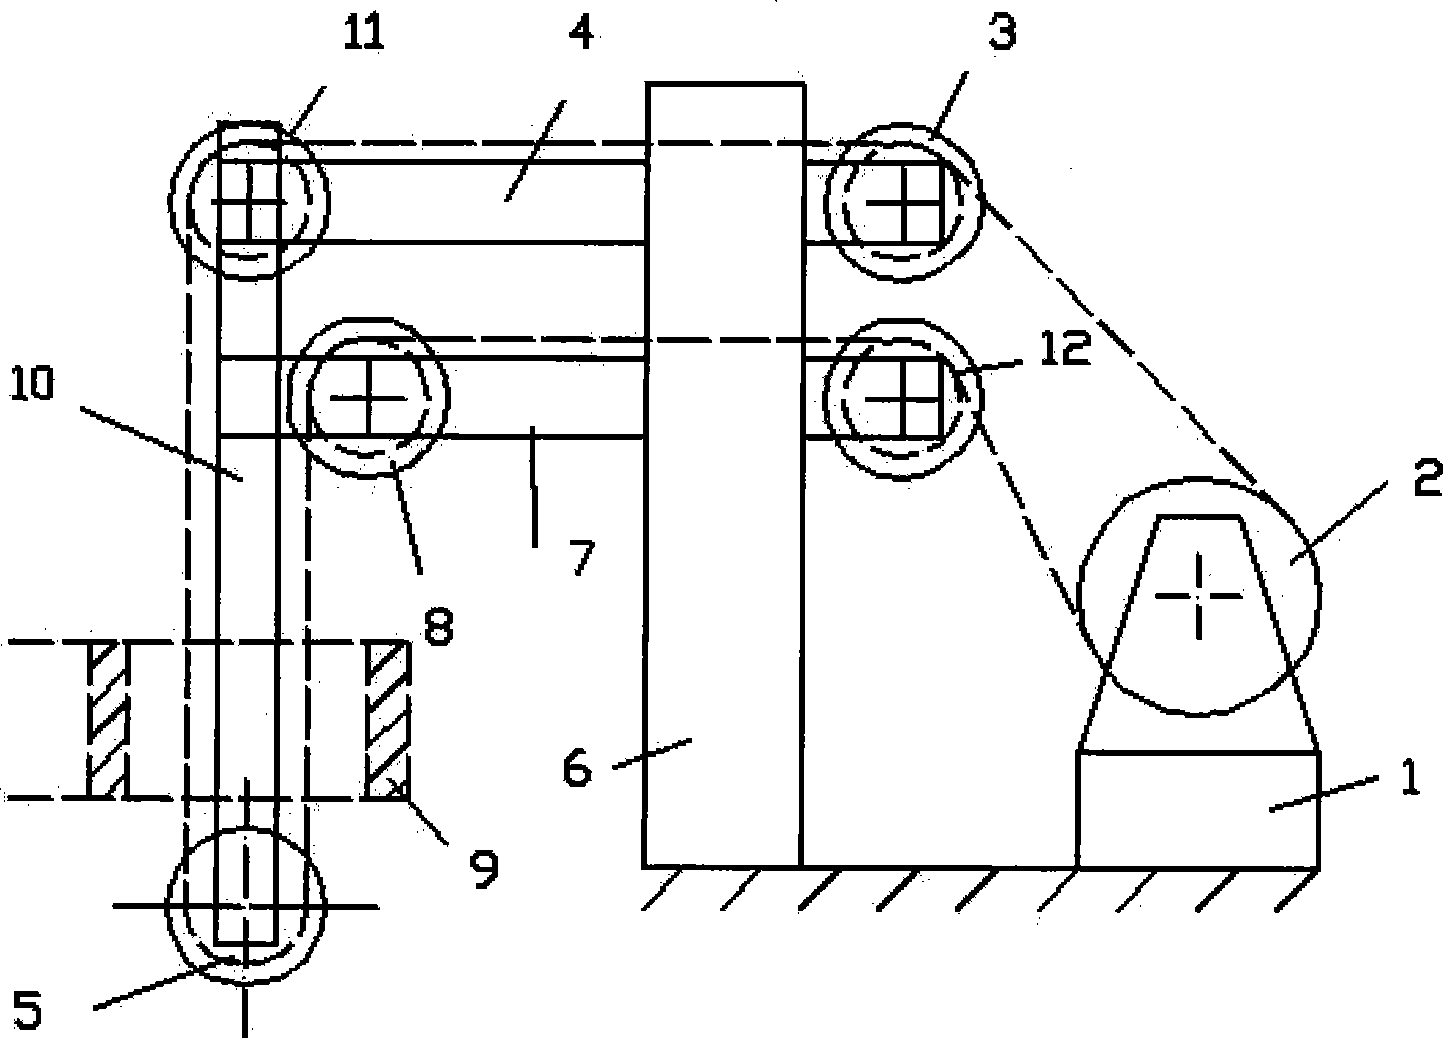 Wire-electrode cutting electromachining machine tool for asymmetrical guide frame notch cutting in series